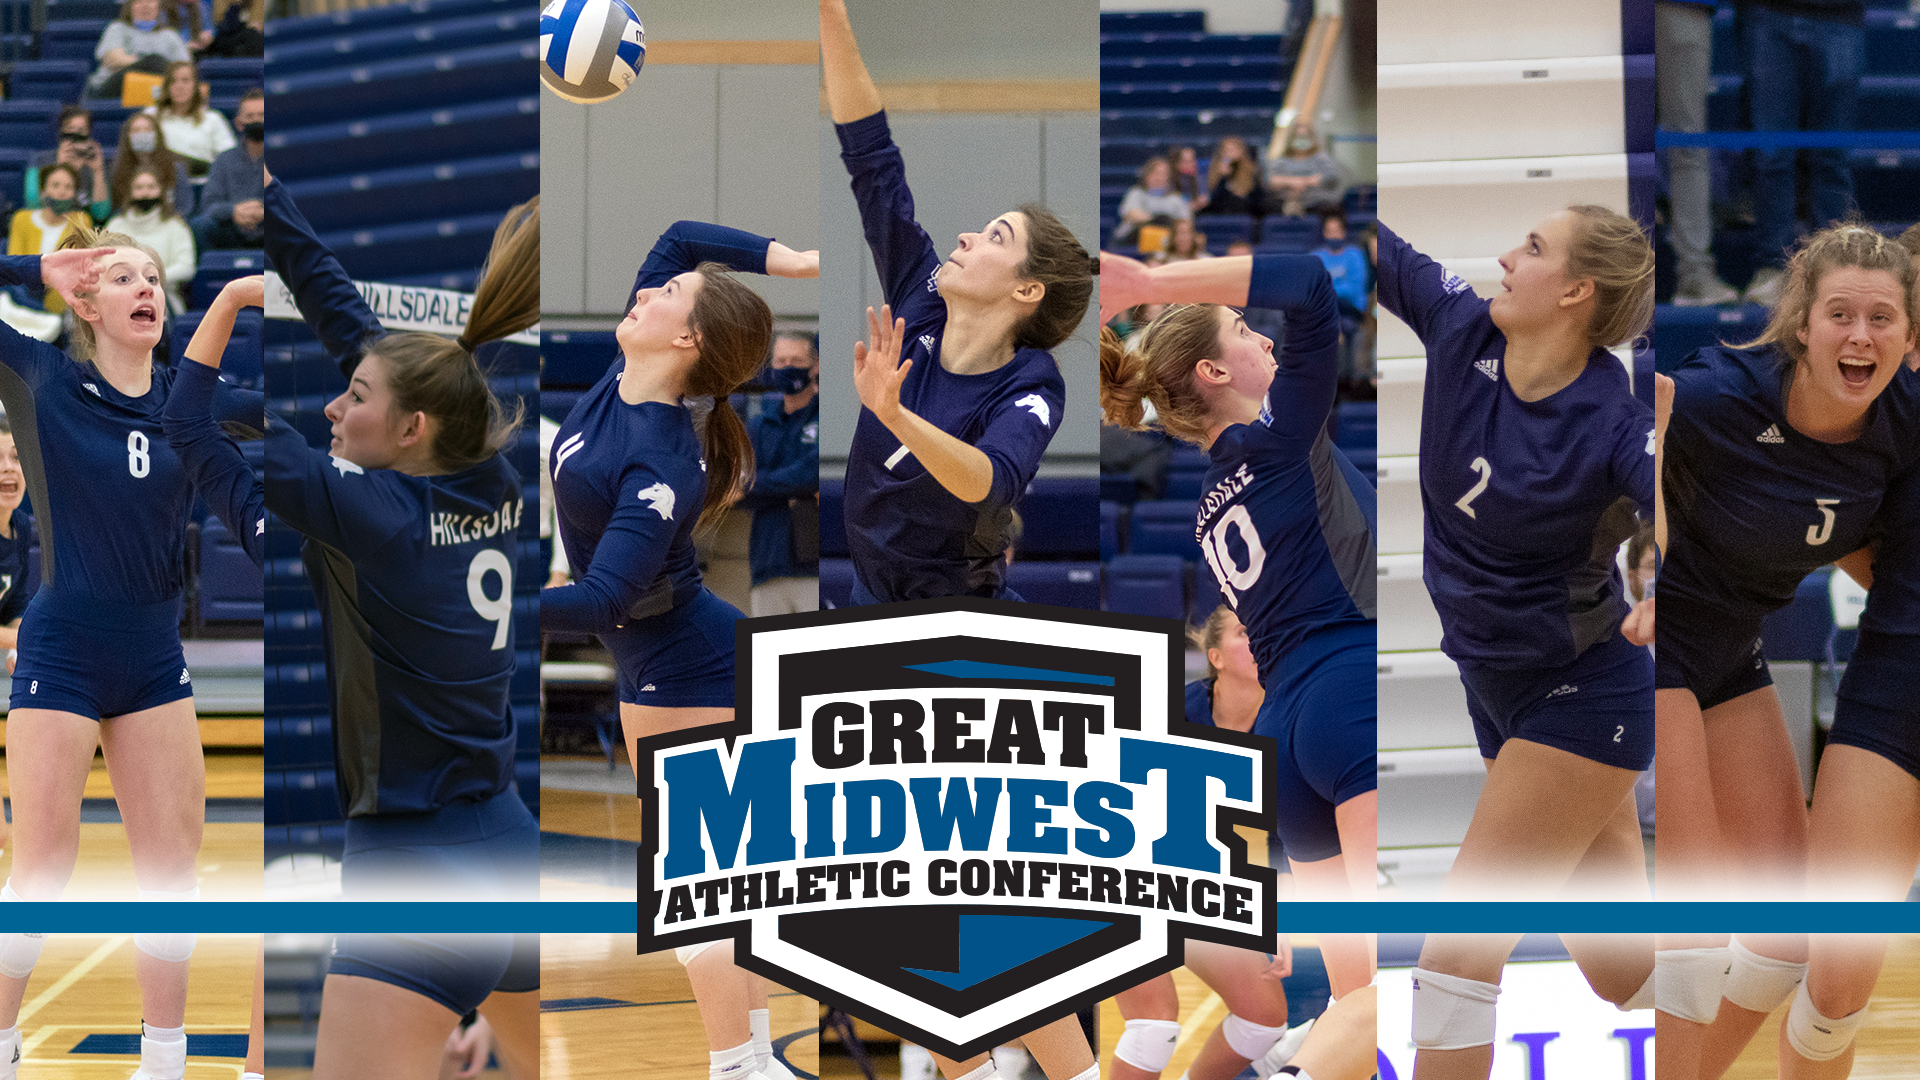 Charger volleyball’s Shelton earns G-MAC Player of the Year honors; seven make All-G-MAC team